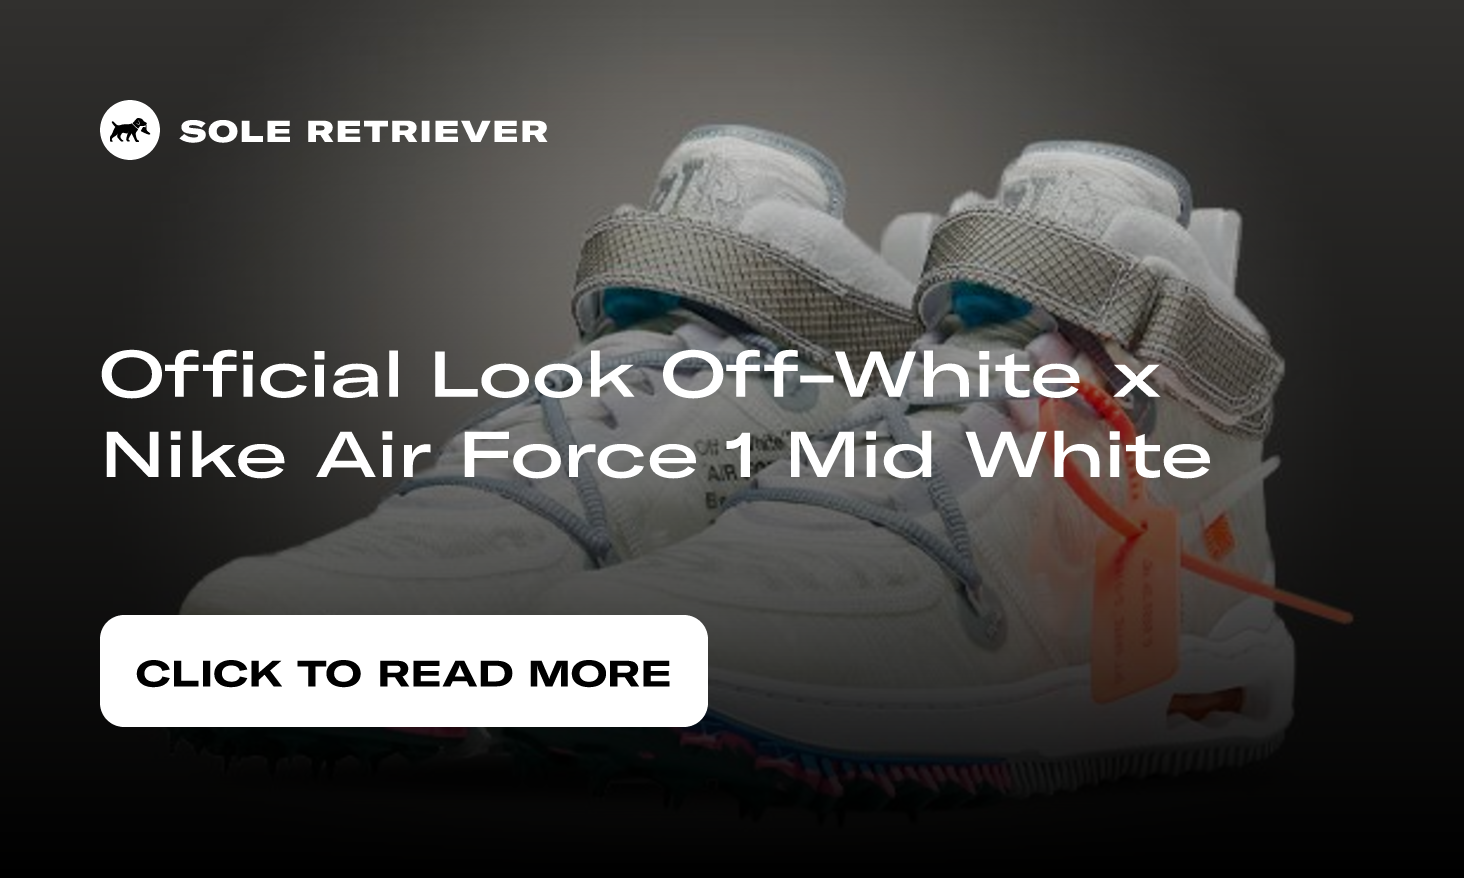 Off-White™ x Nike Air Force 1 Mid White Official Look